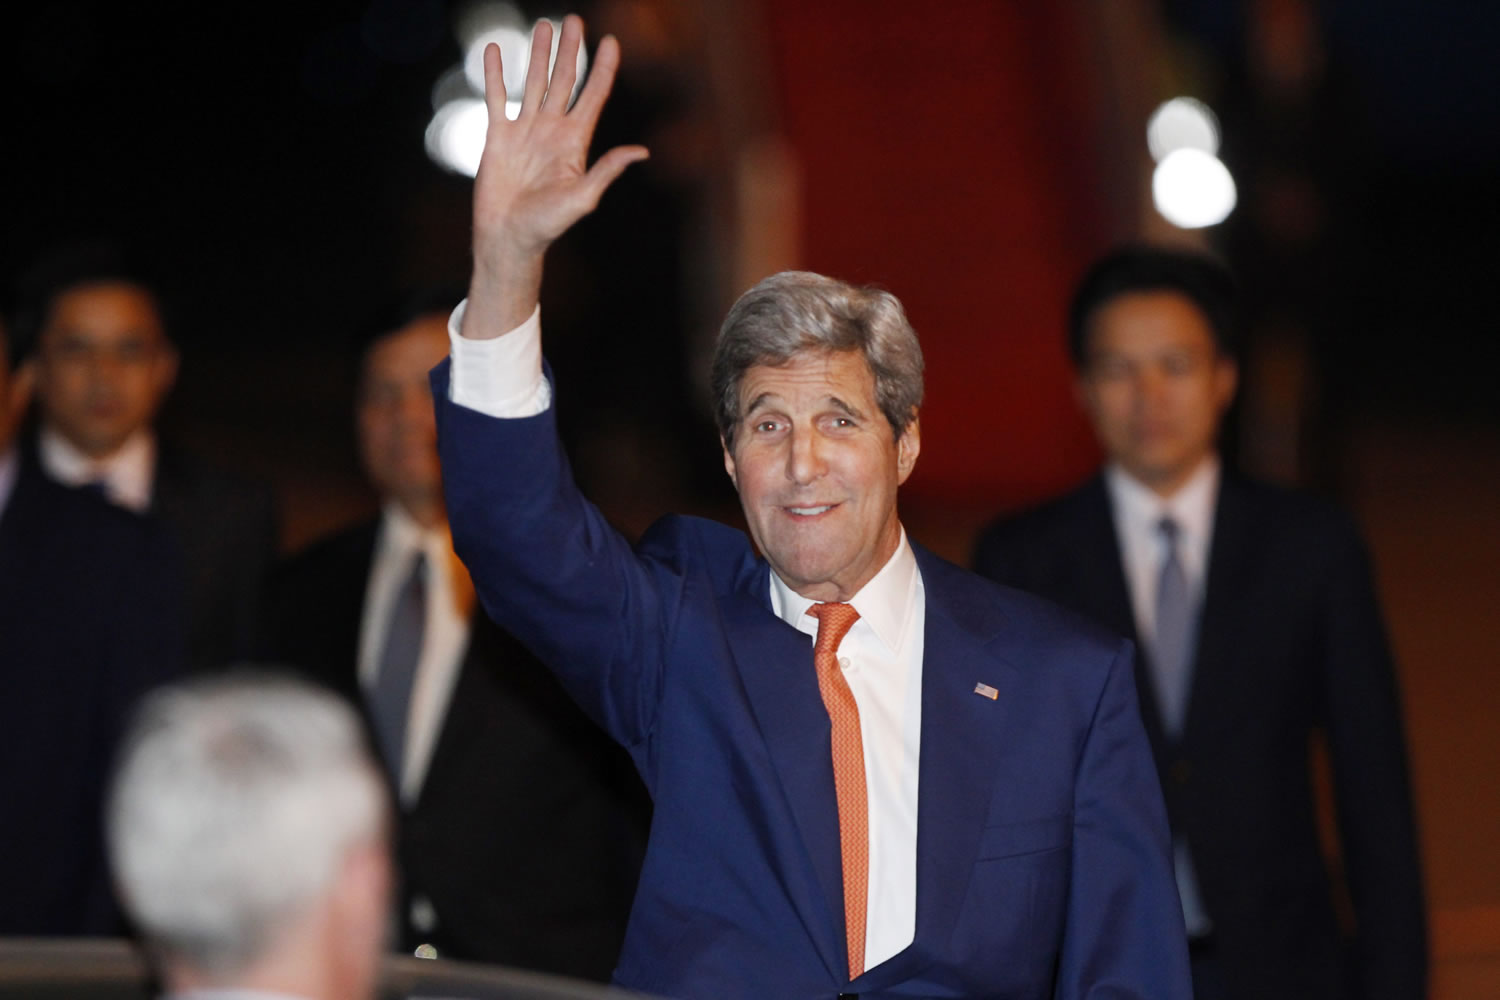 U.S. Secretary of States John Kerry, second from right, waves at Cambodian officials upon his arrival at Phnom Penh International Airport in Phnom Penh, Cambodia, on Monday. Kerry arrived in Phnom Penh for his two-day official visit to Cambodia.